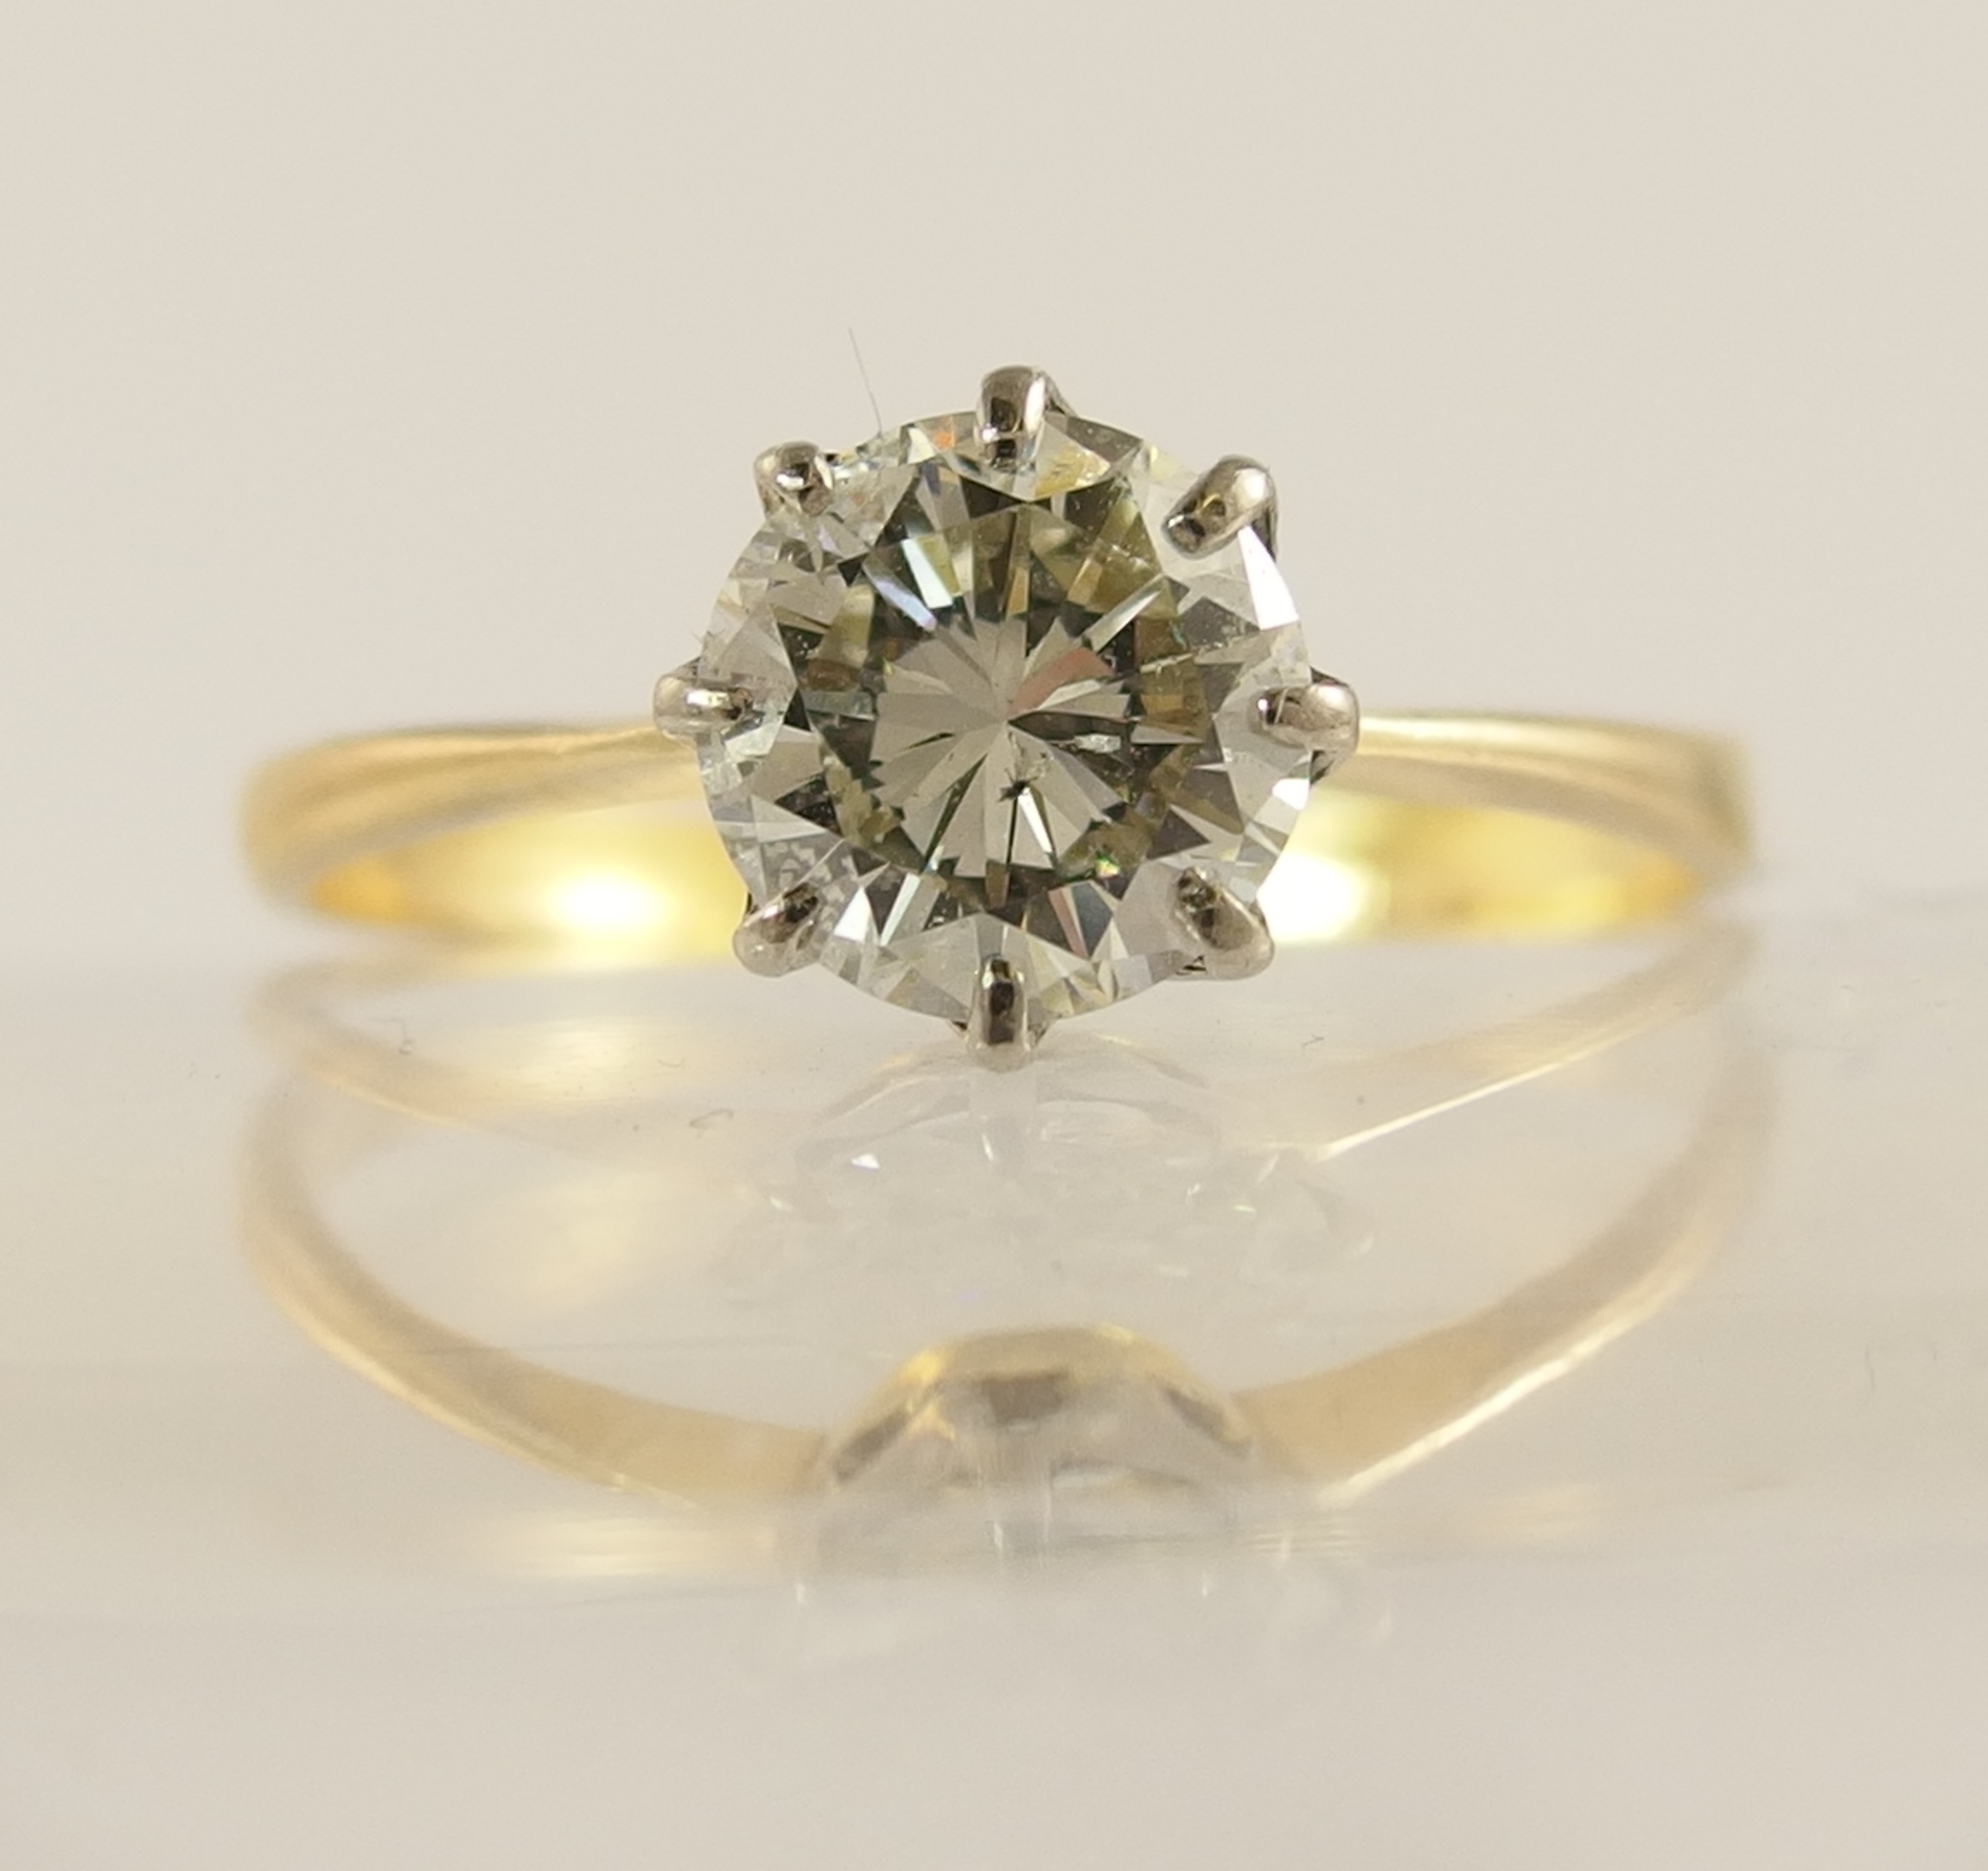 A 1.12ct diamond solitaire ring with classic crown mount in white metal with a tapered yellow